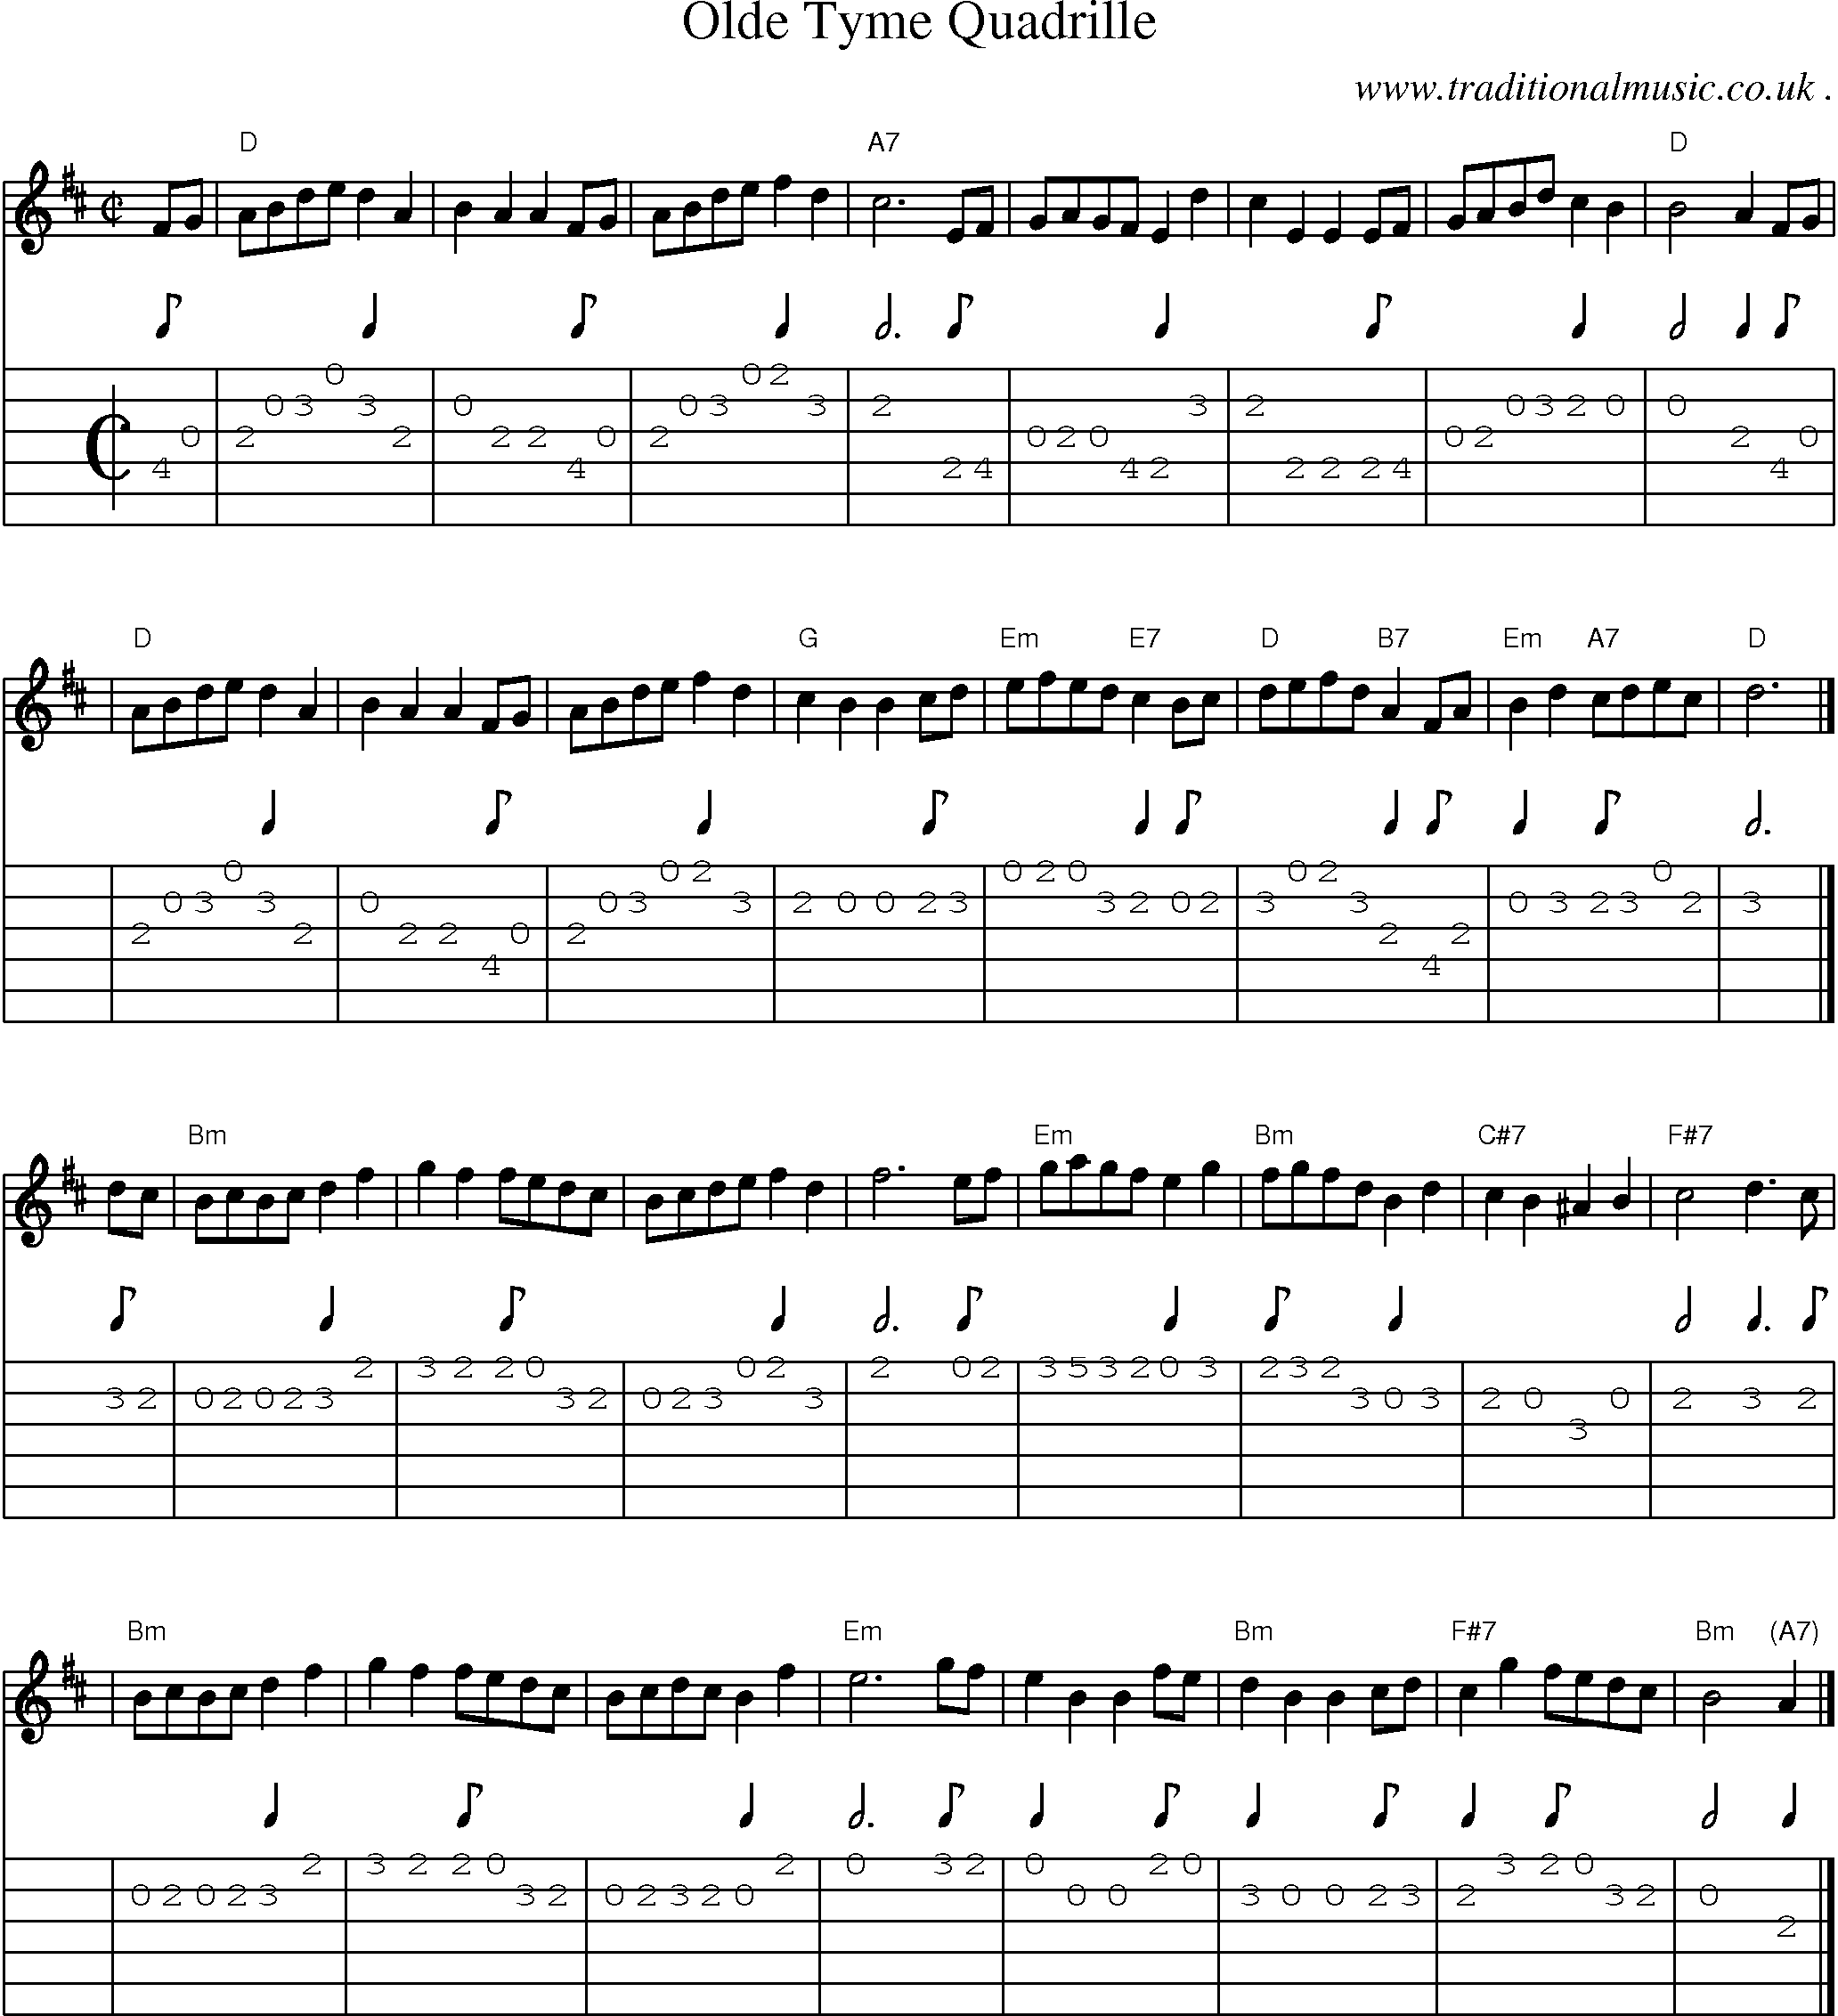 Sheet-music  score, Chords and Guitar Tabs for Olde Tyme Quadrille